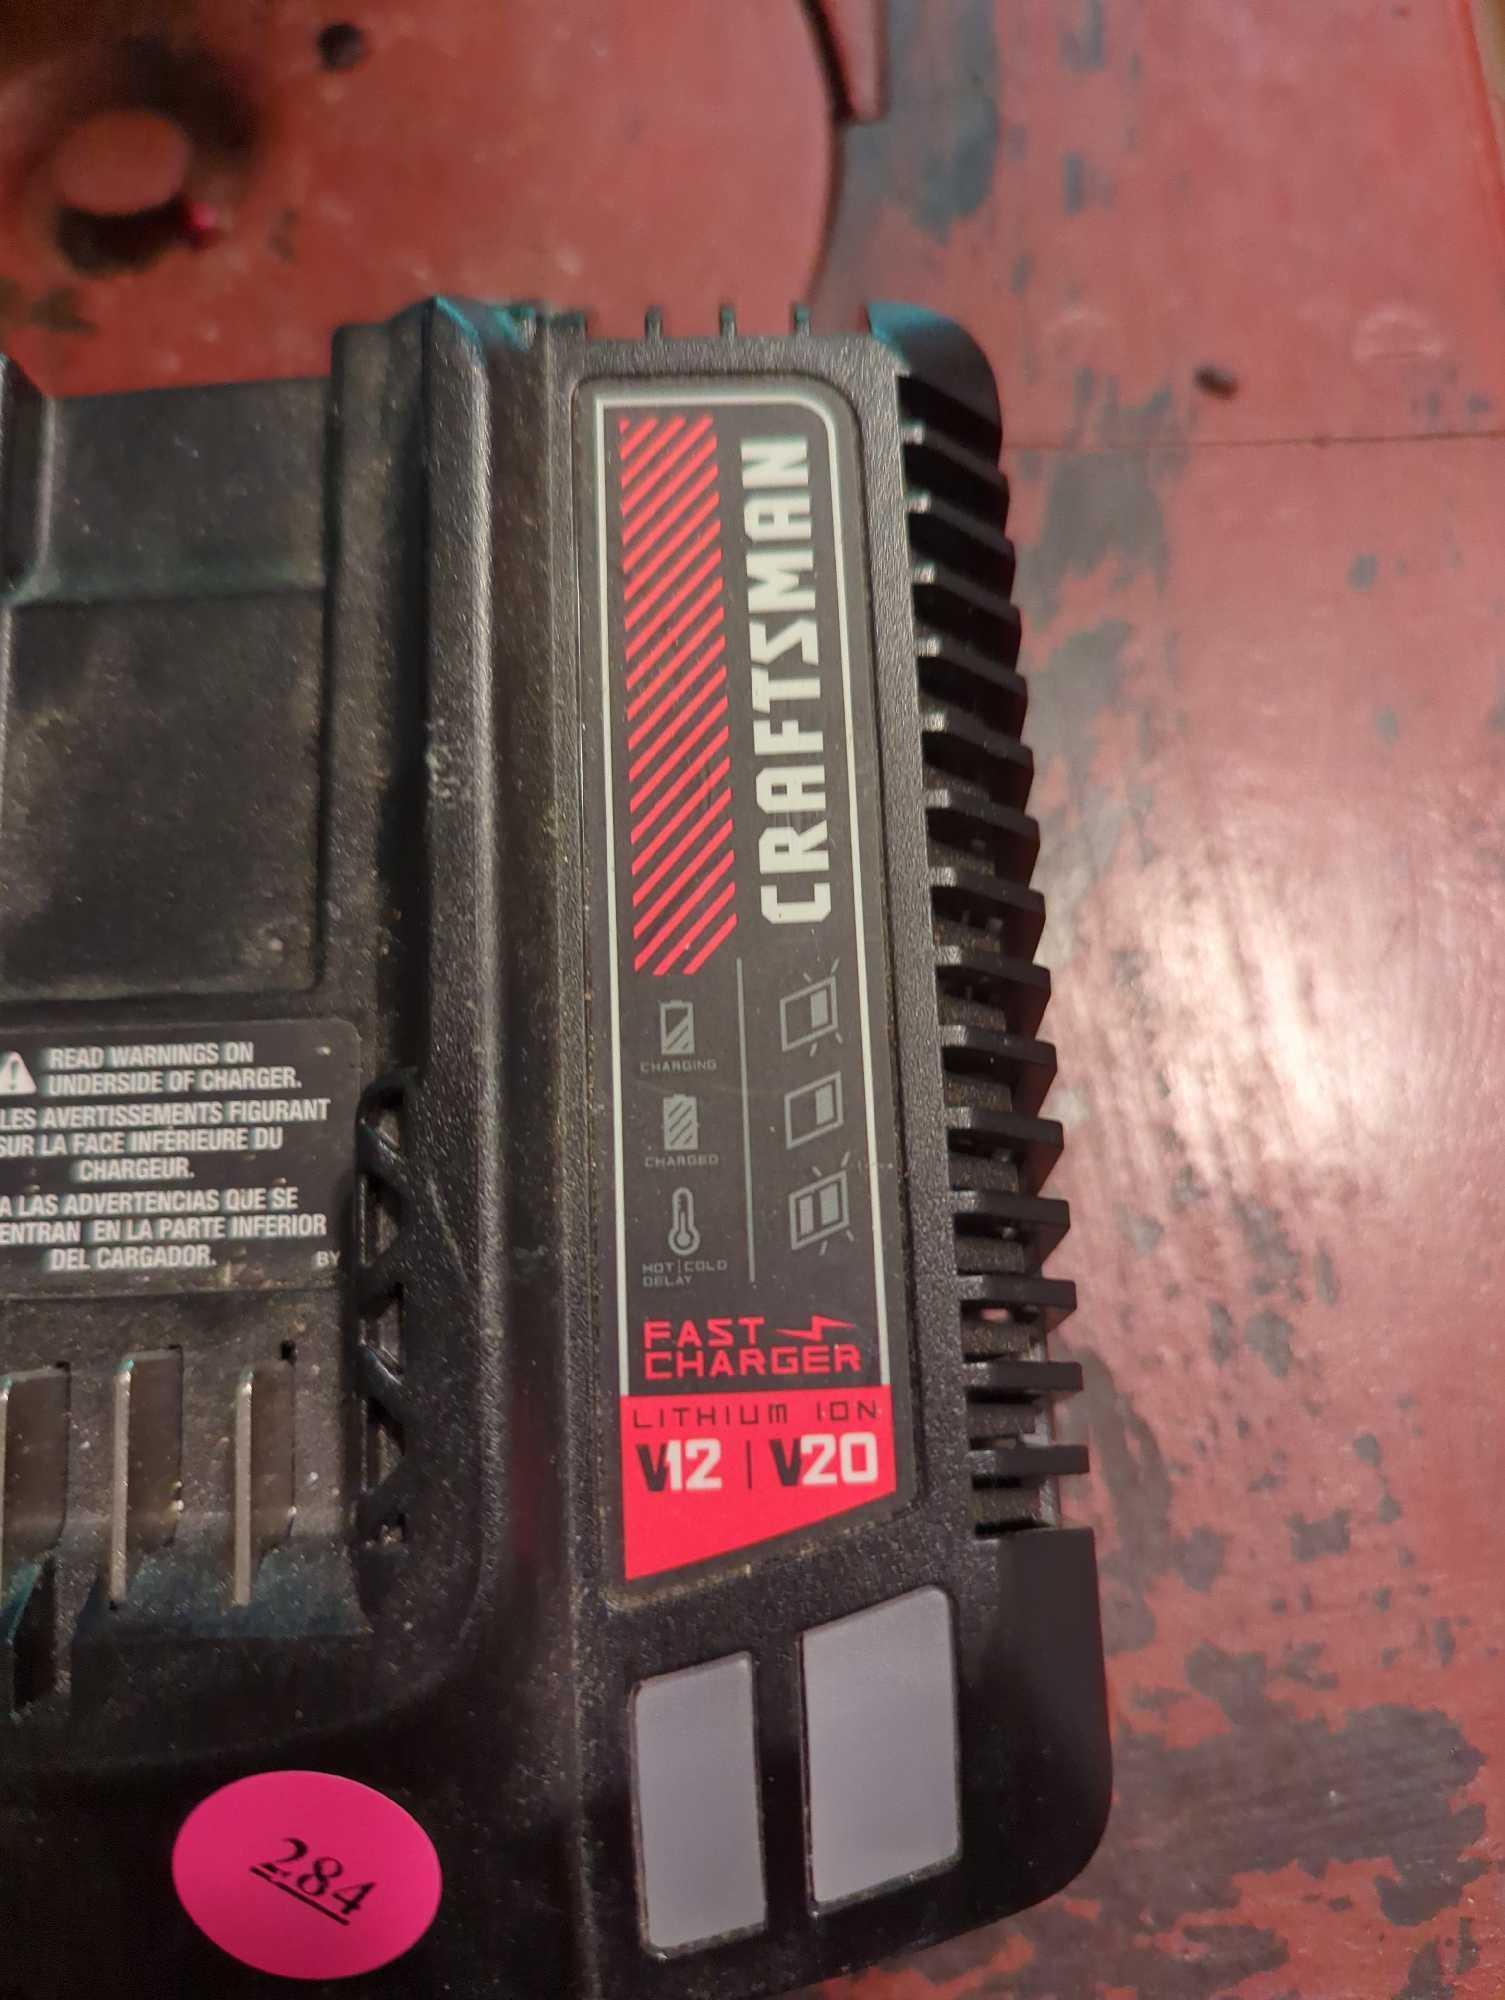 (KIT) CRAFTSMAN CMCB102 TYPE 1 -12V 20V MAX LITHIUM-ION BATTERY CHARGER, IS IN GREAT CONDITION, WHAT